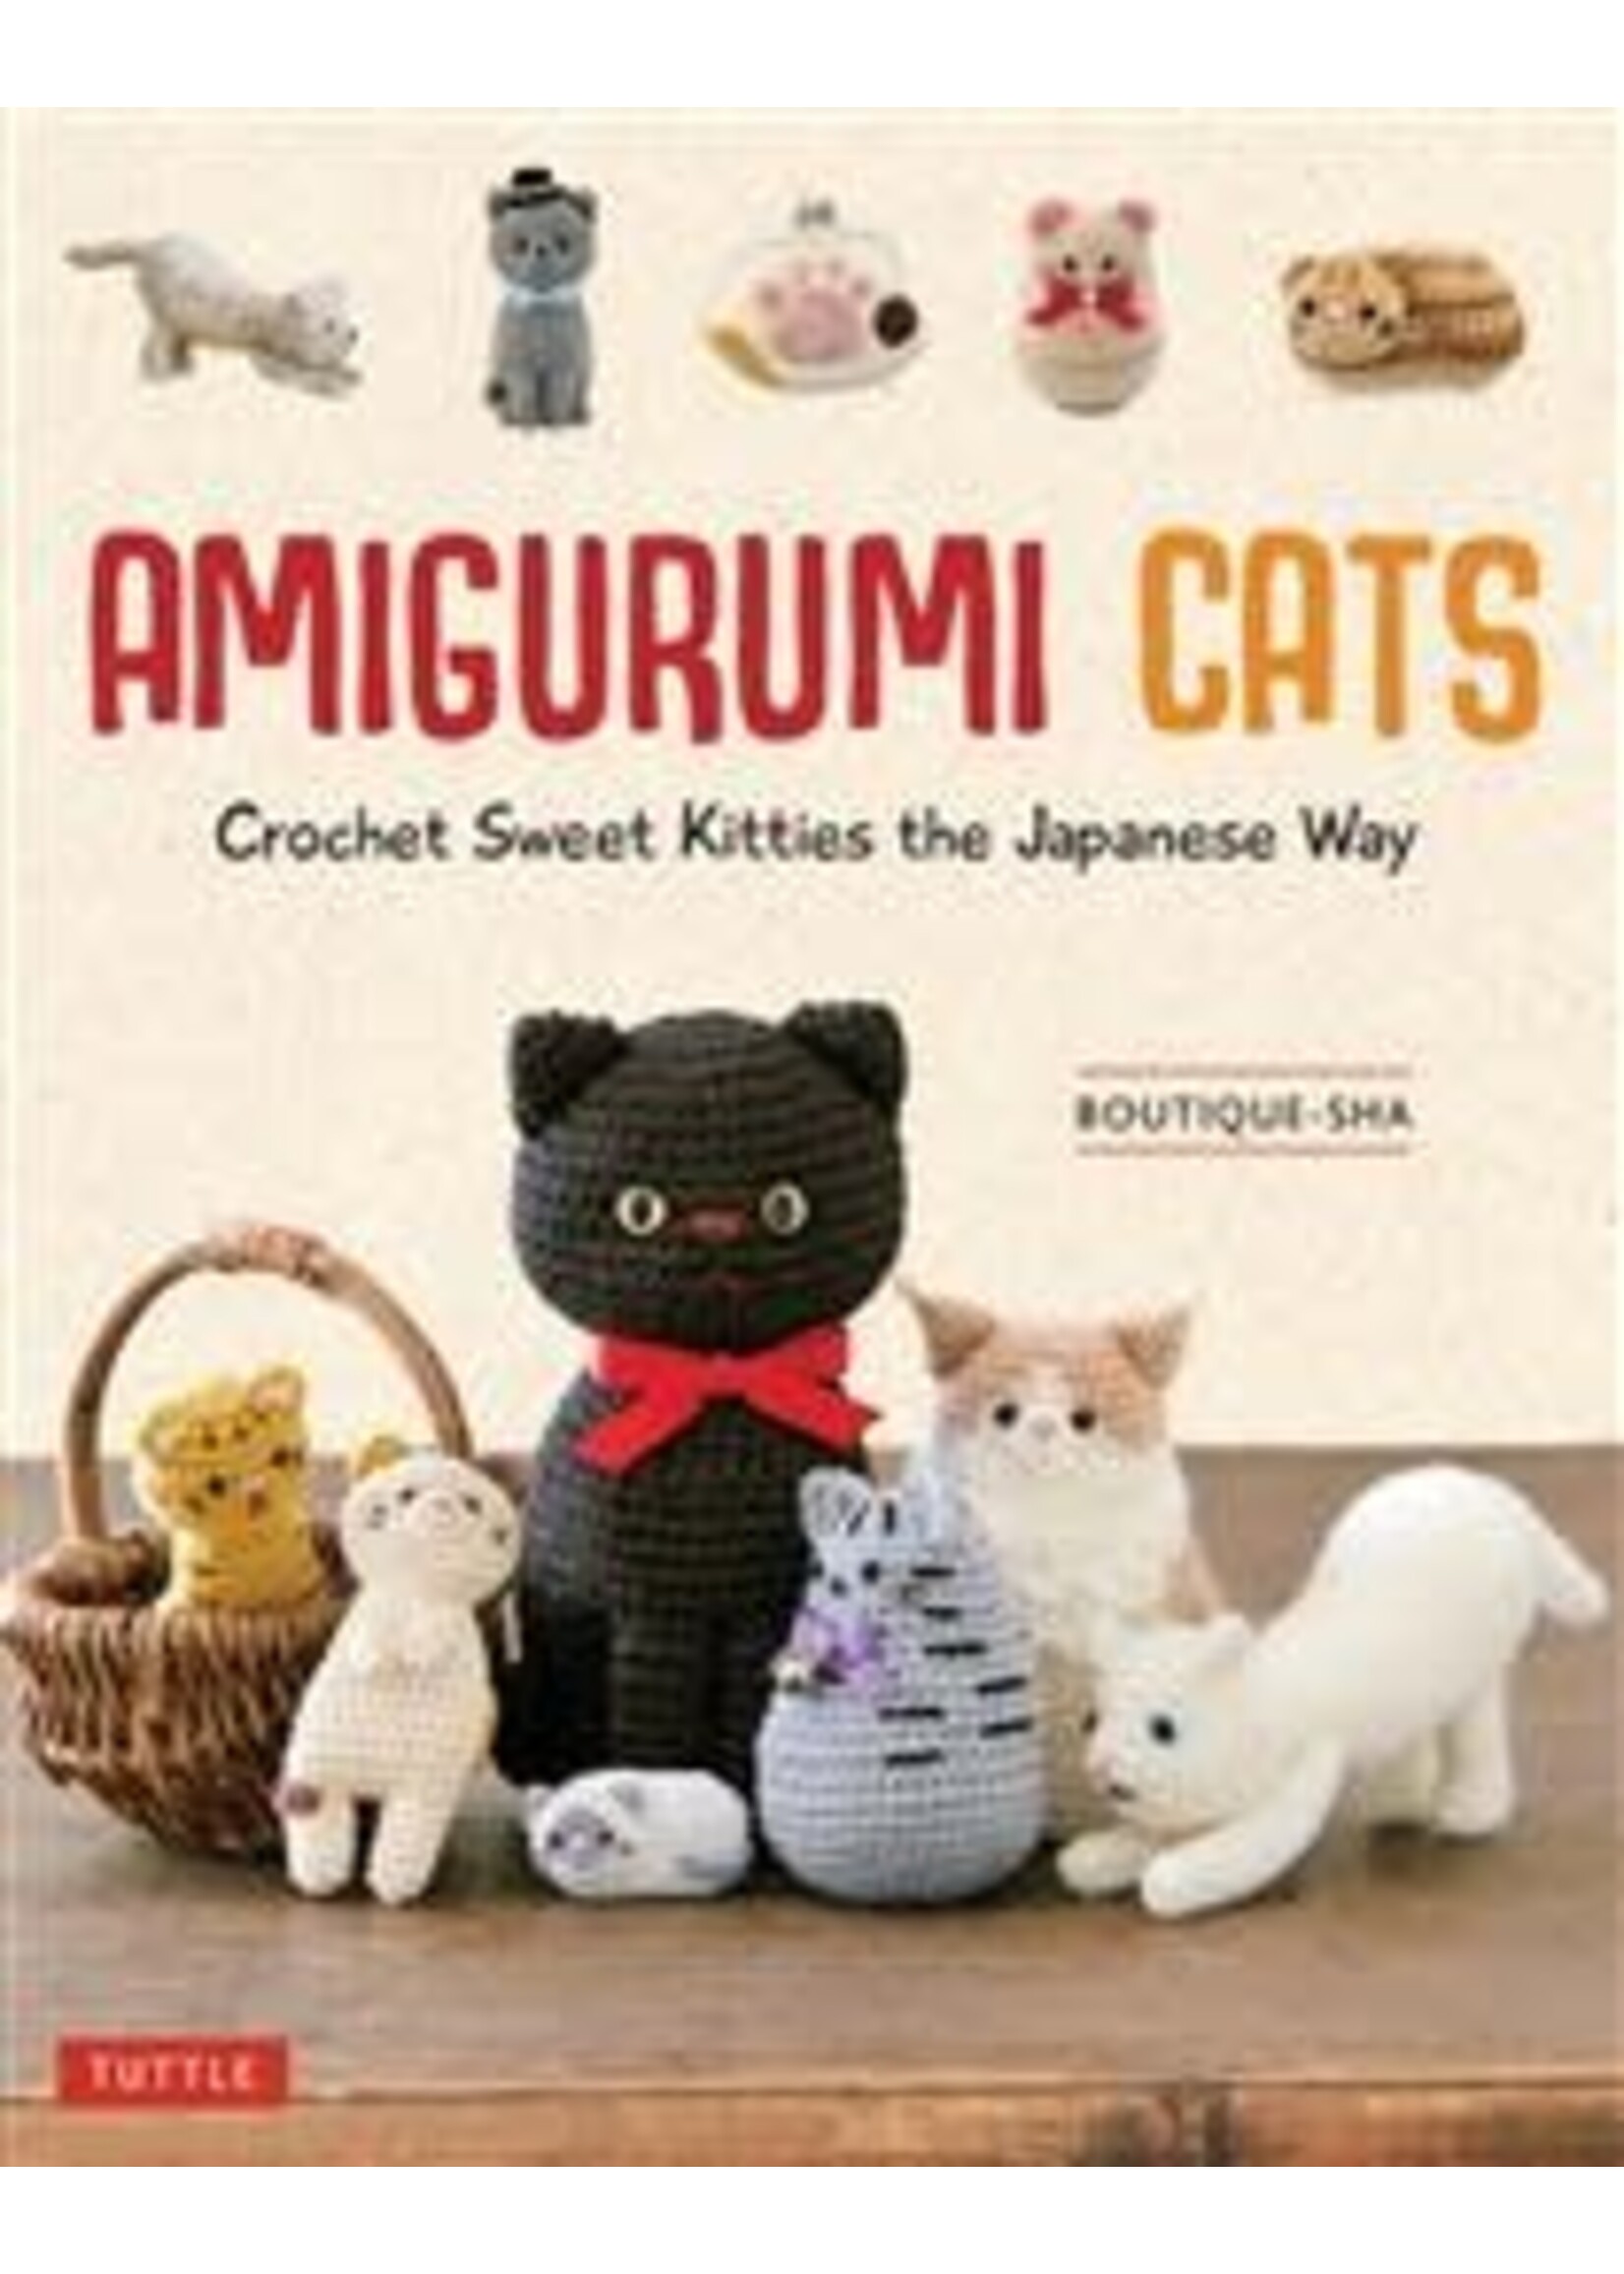 Amigurumi Cats: Crochet Sweet Kitties the Japanese Way (24 Projects of Cats to Crochet) by Boutique-Sha